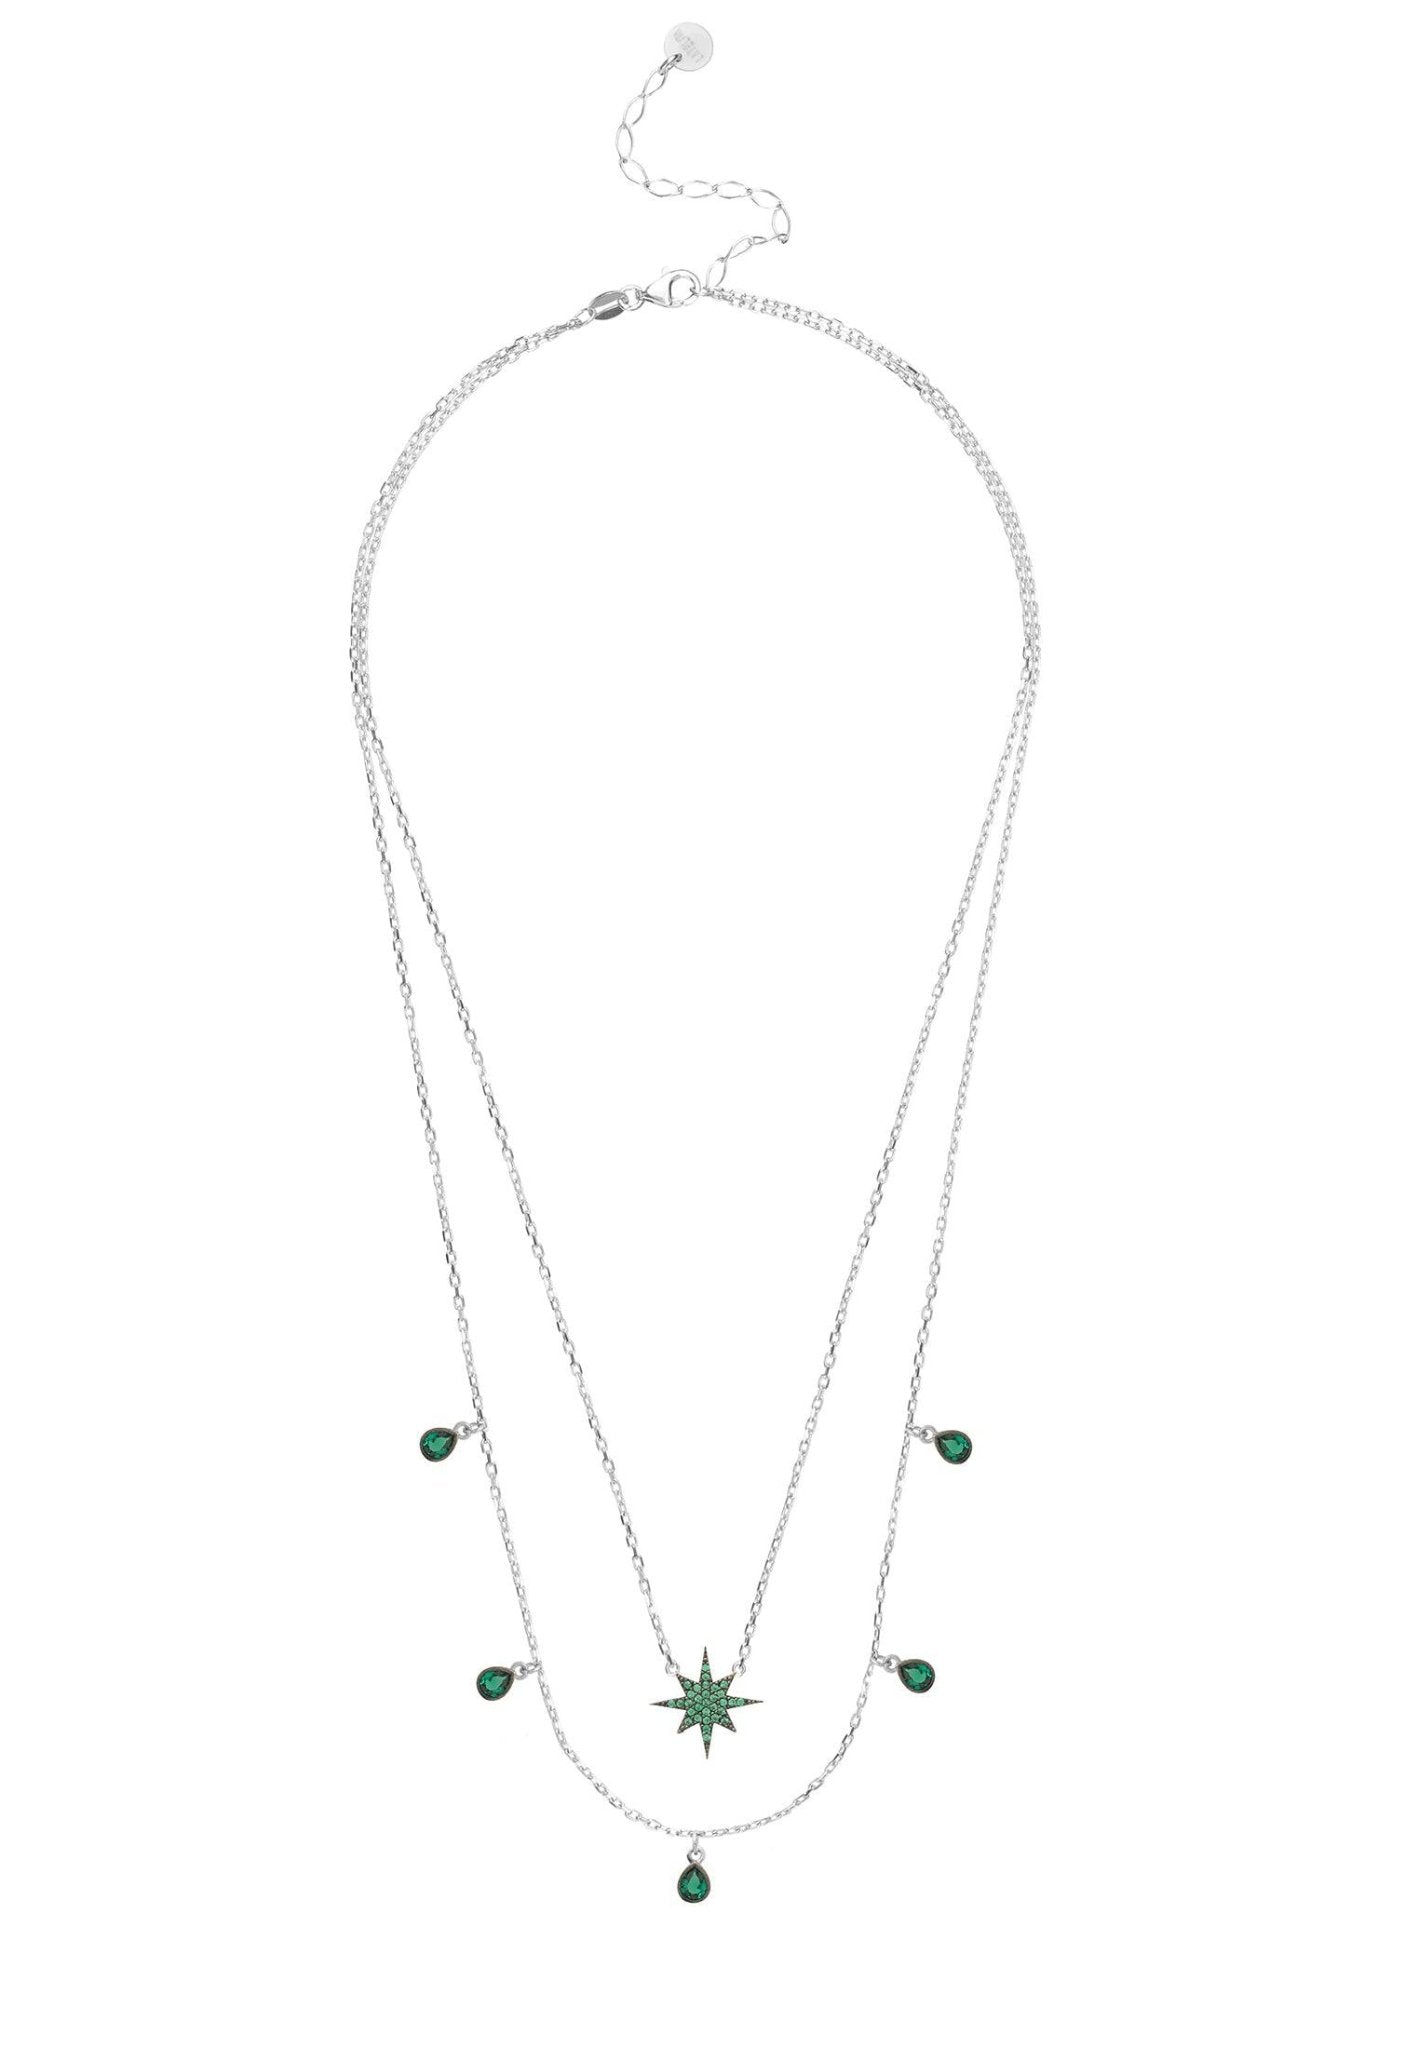 Starburst Double Strand Layered Necklace Silver Emerald Green - LATELITA Necklaces